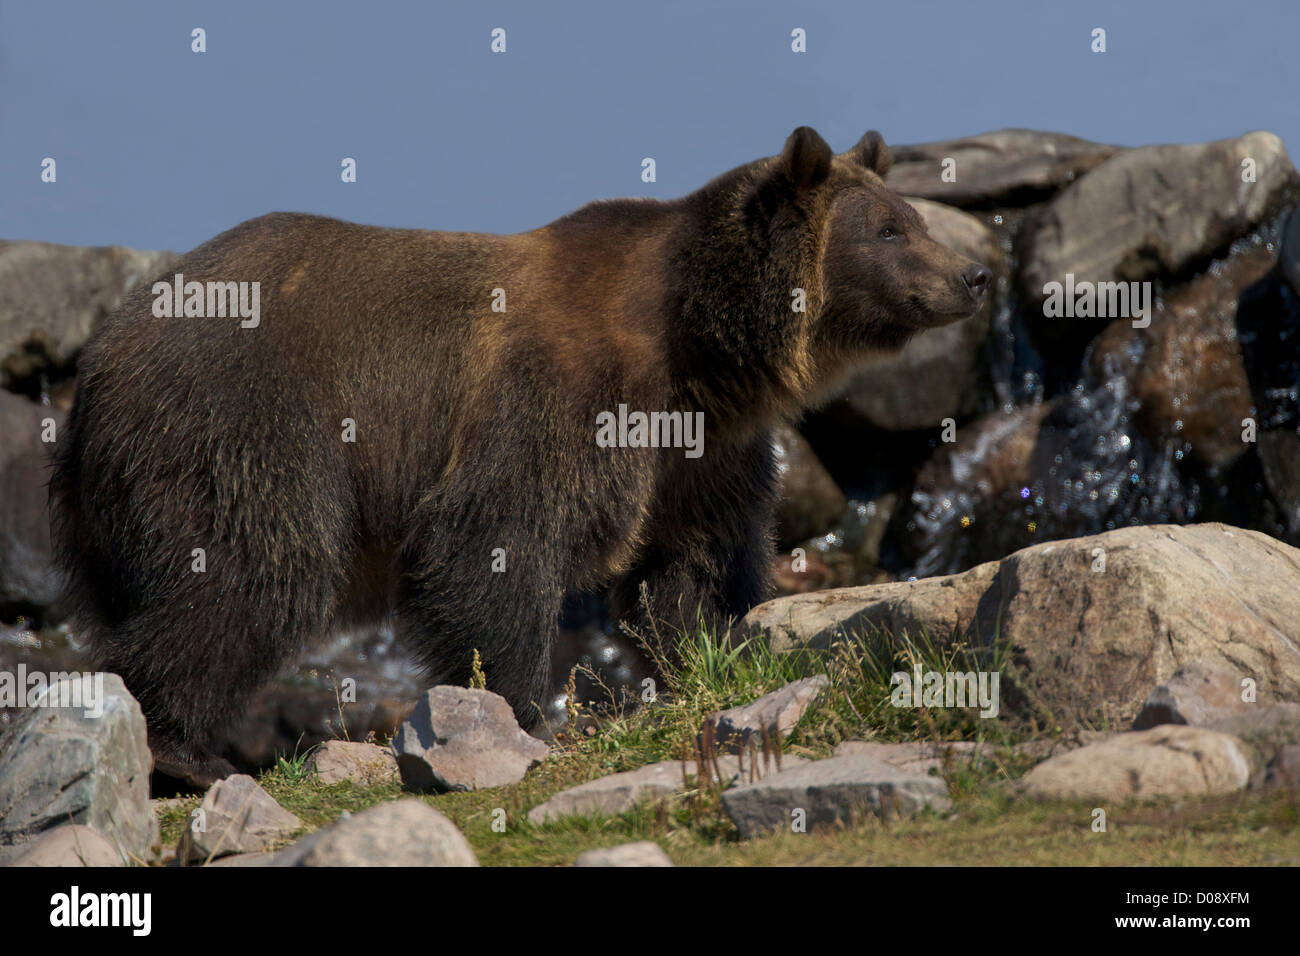 Grizzly bear, Ursus arctos horribilis, Grizzly and Wolf Discovery Centre, West Yellowstone, Montana, USA Stock Photo